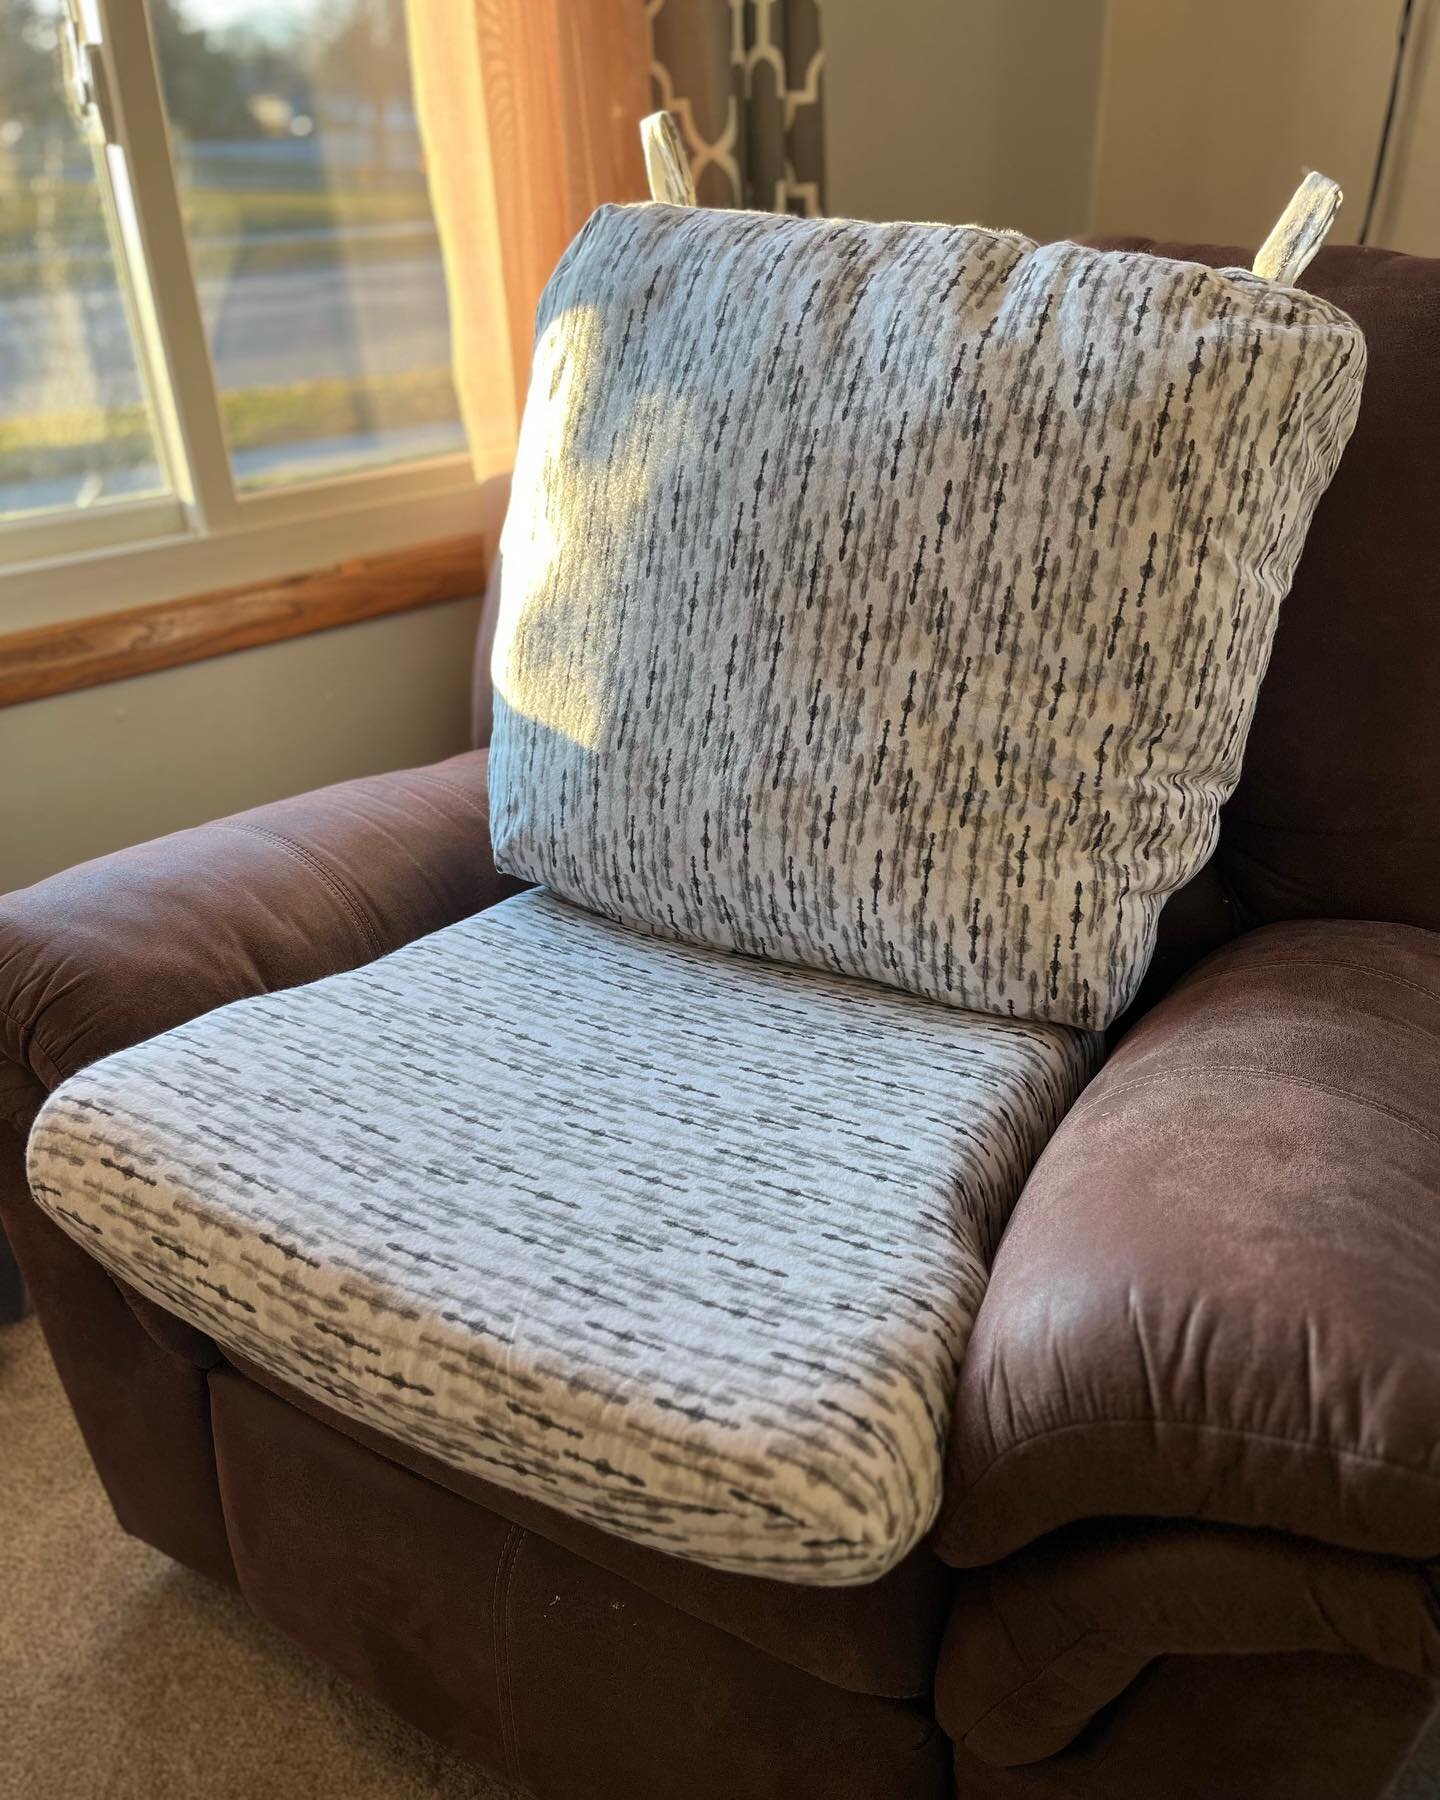 These Fresh seats 🪑 are ready! 🎉

My customer brought me the cushions from an inherited glider gifted to her from her grandmother. She wanted to keep the chair that had a perfectly good frame but wanted the cushions reupholstered to let this match 